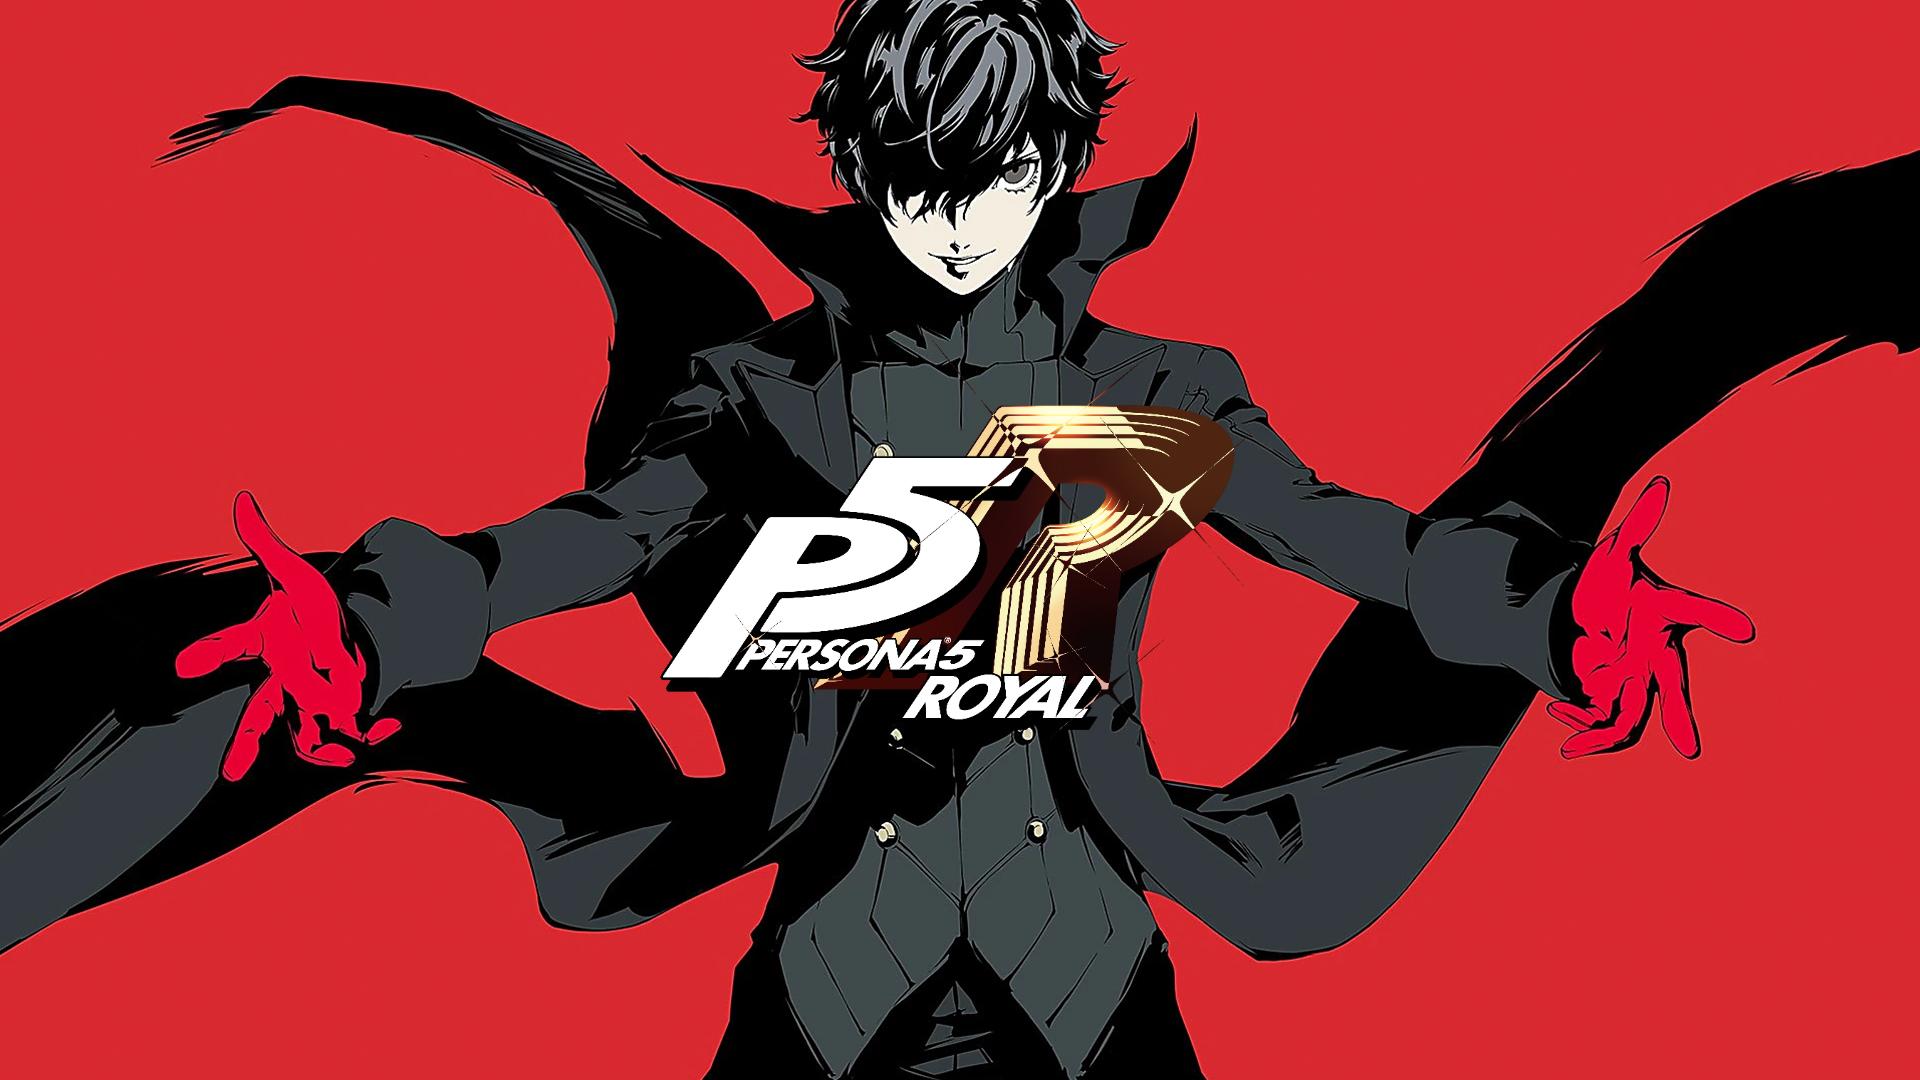 Persona 5 Royal is coming in 2020 to Australia